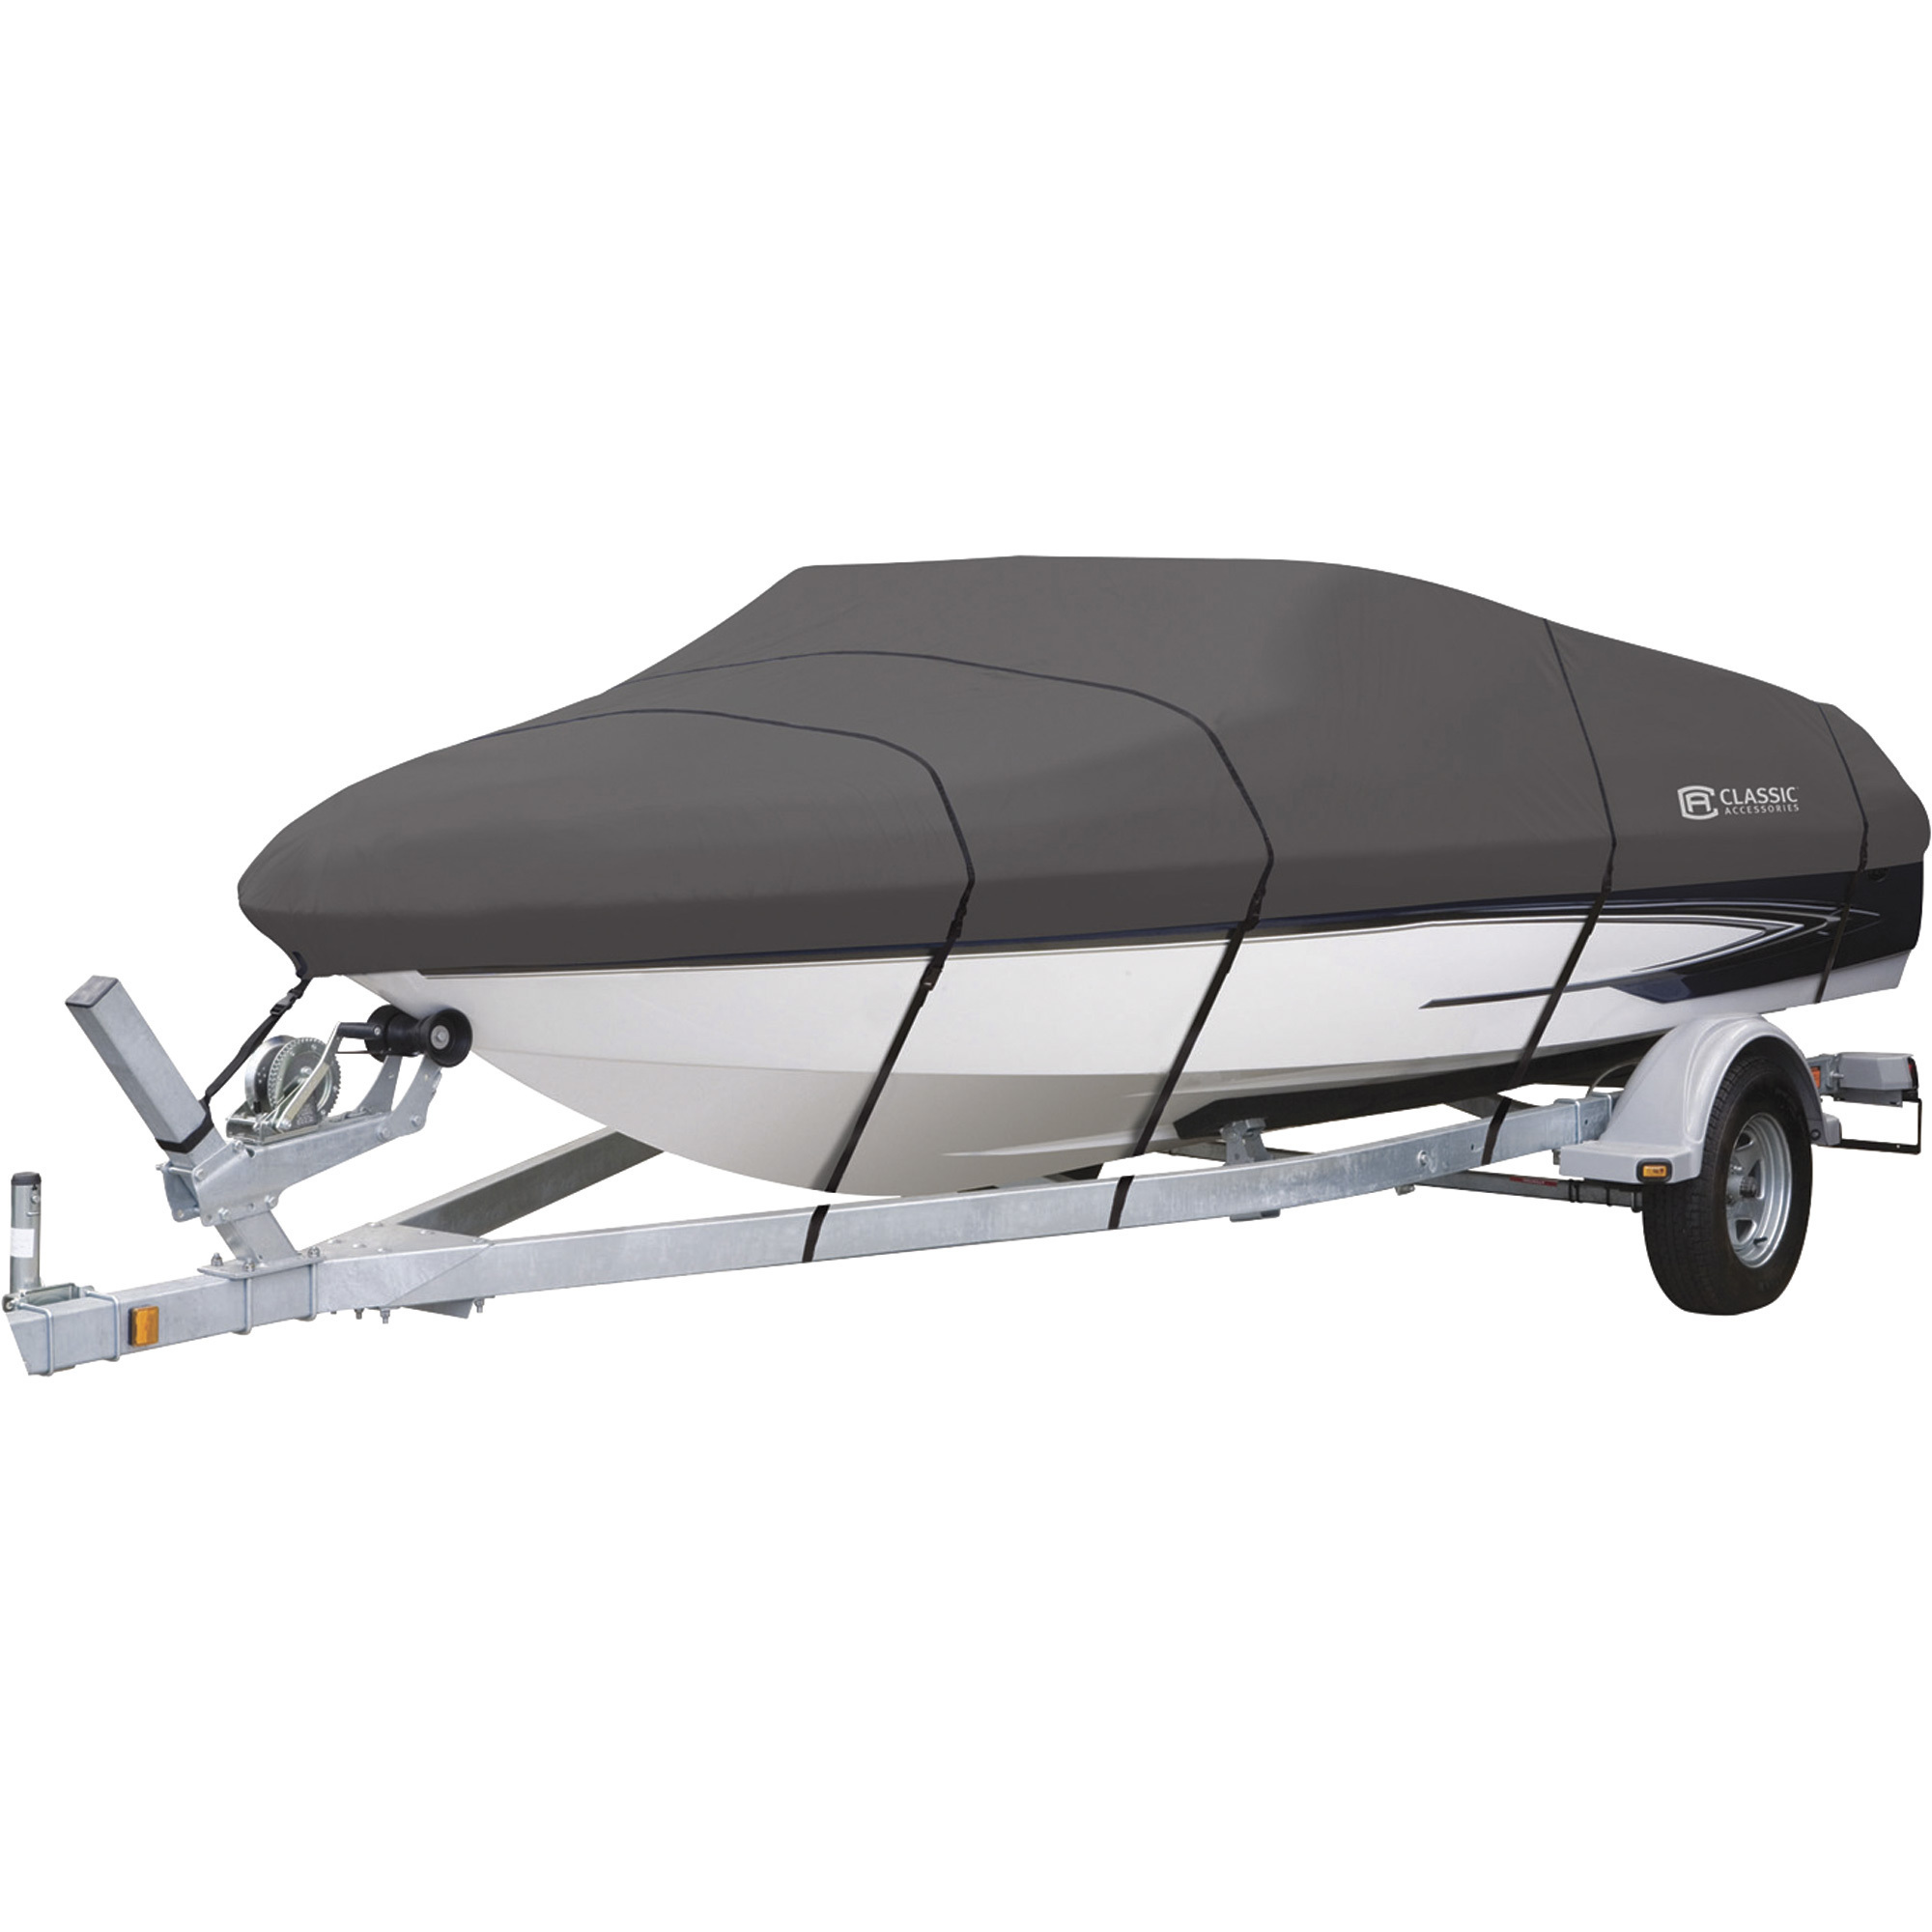 Classic Accessories StormPro Heavy-Duty Boat Cover, Charcoal, Fits 16ft.-18 1/2ft. x 98Inch W Boats, Model 88938